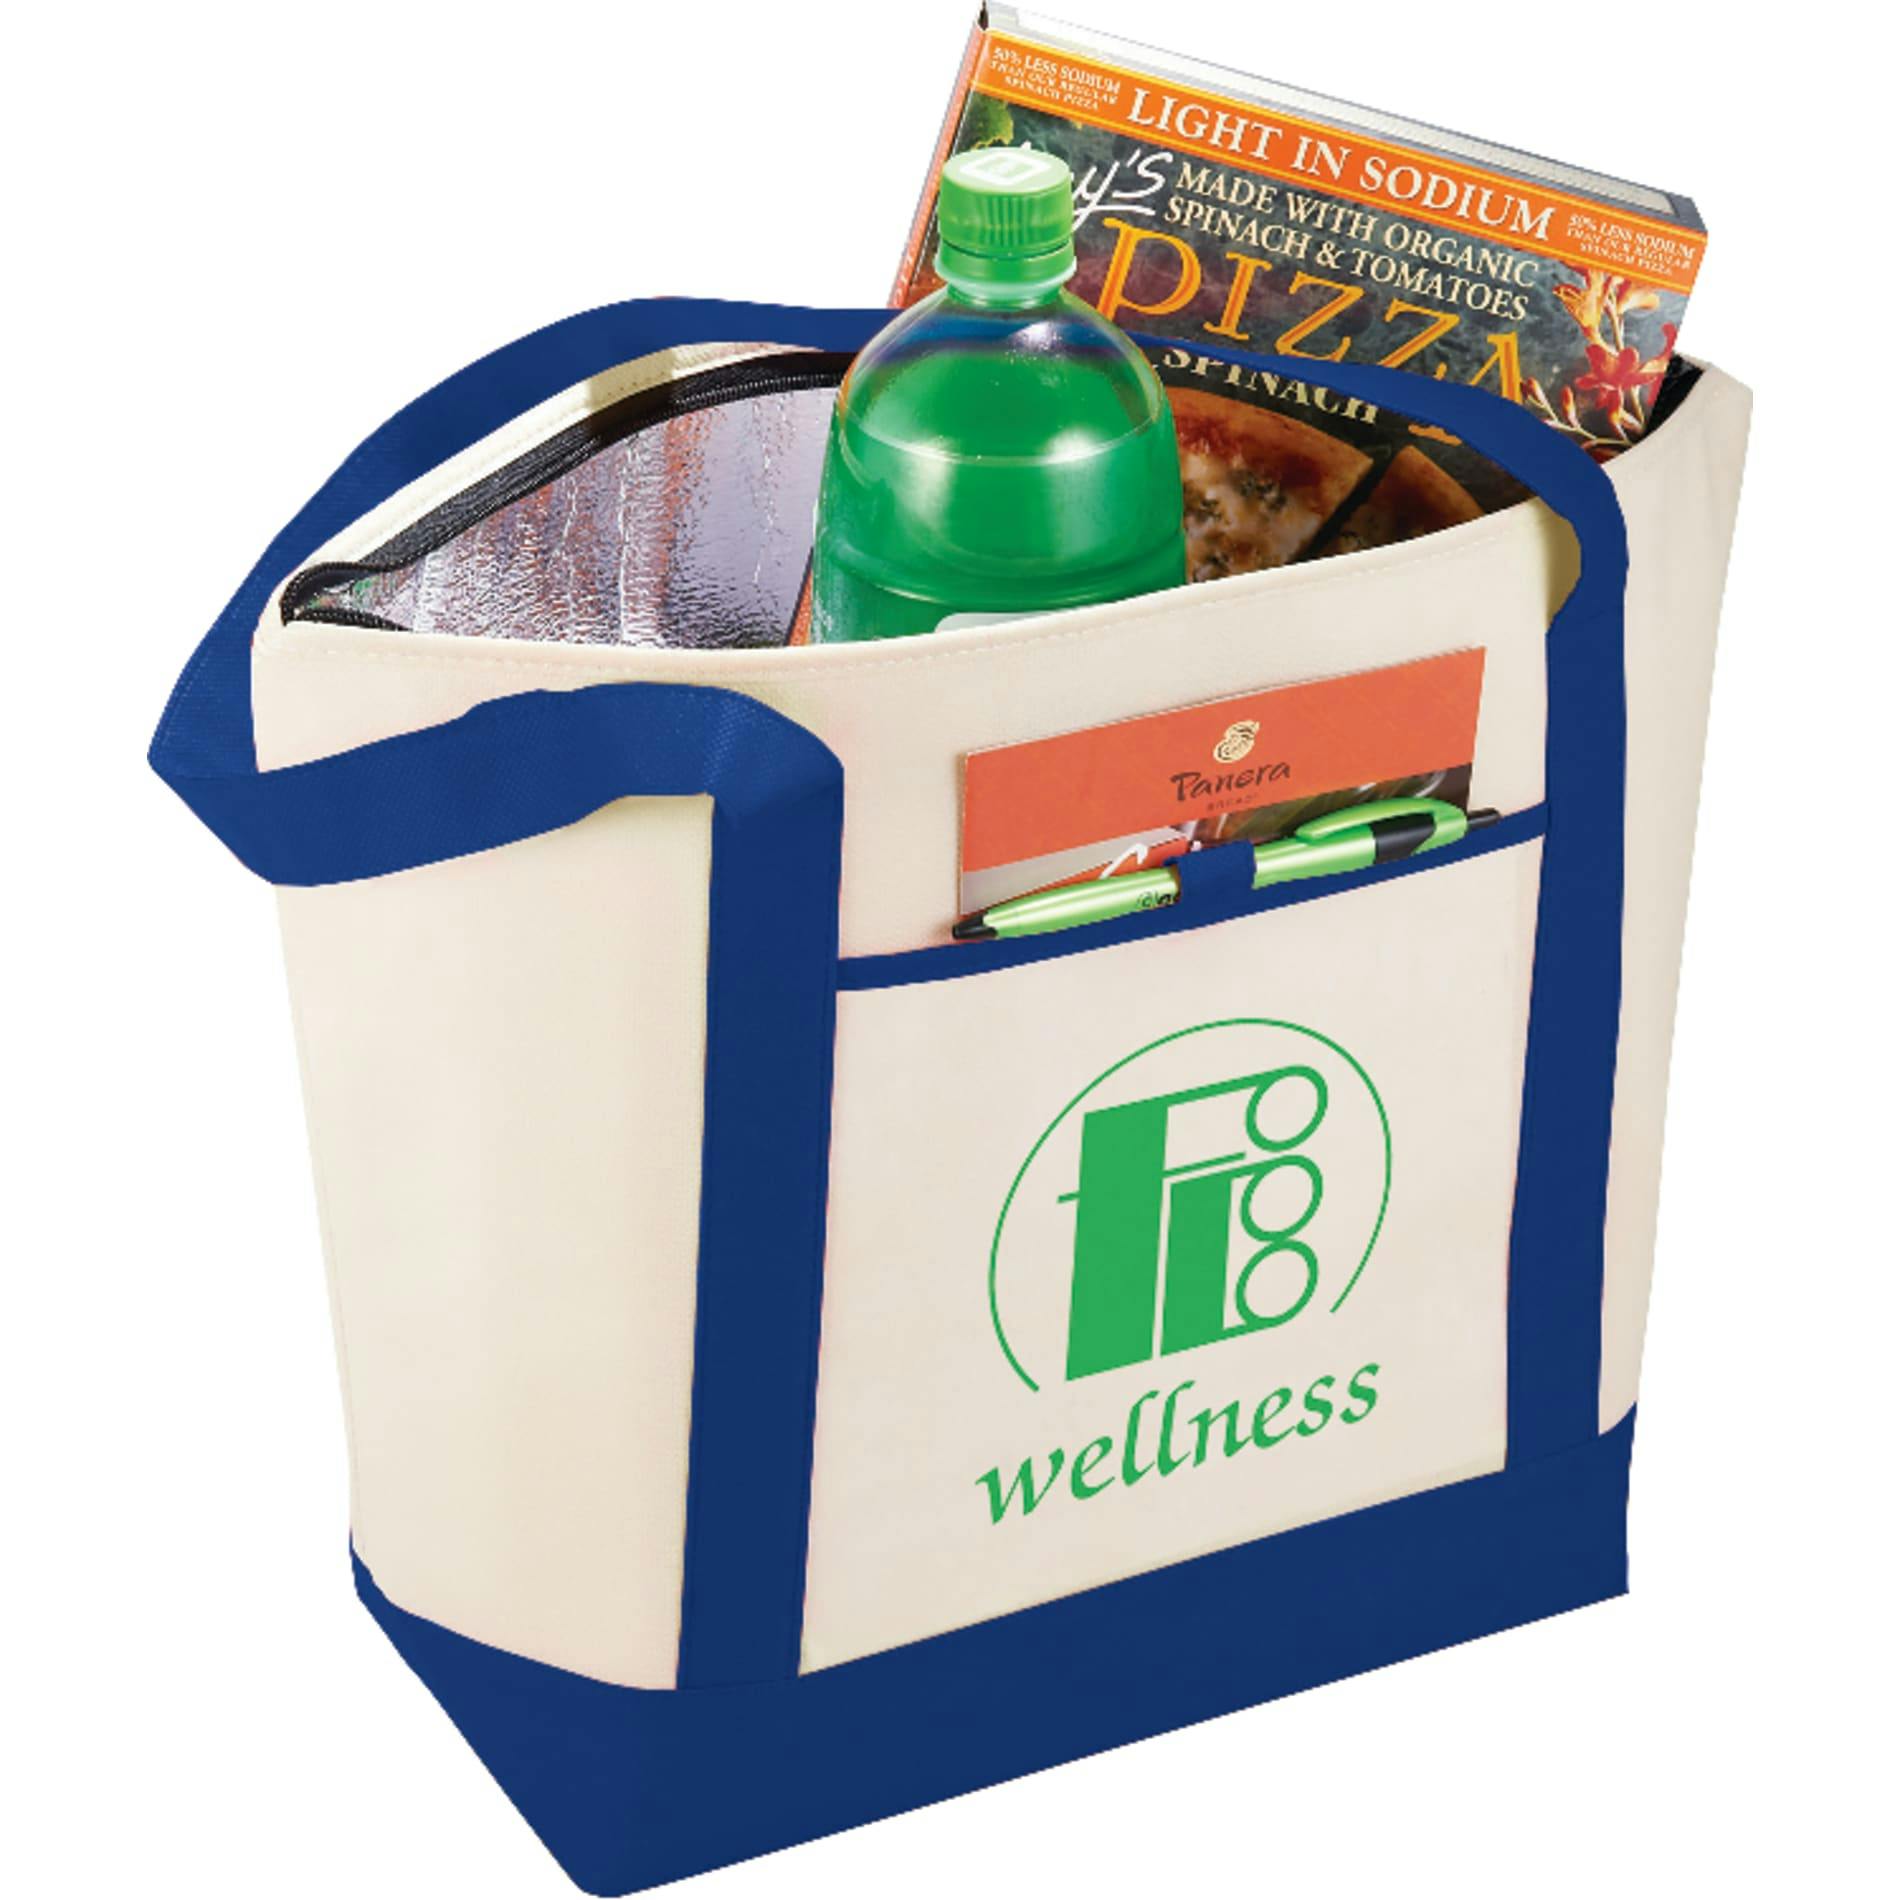 Lighthouse 24-Can Non-Woven Tote Cooler - additional Image 1